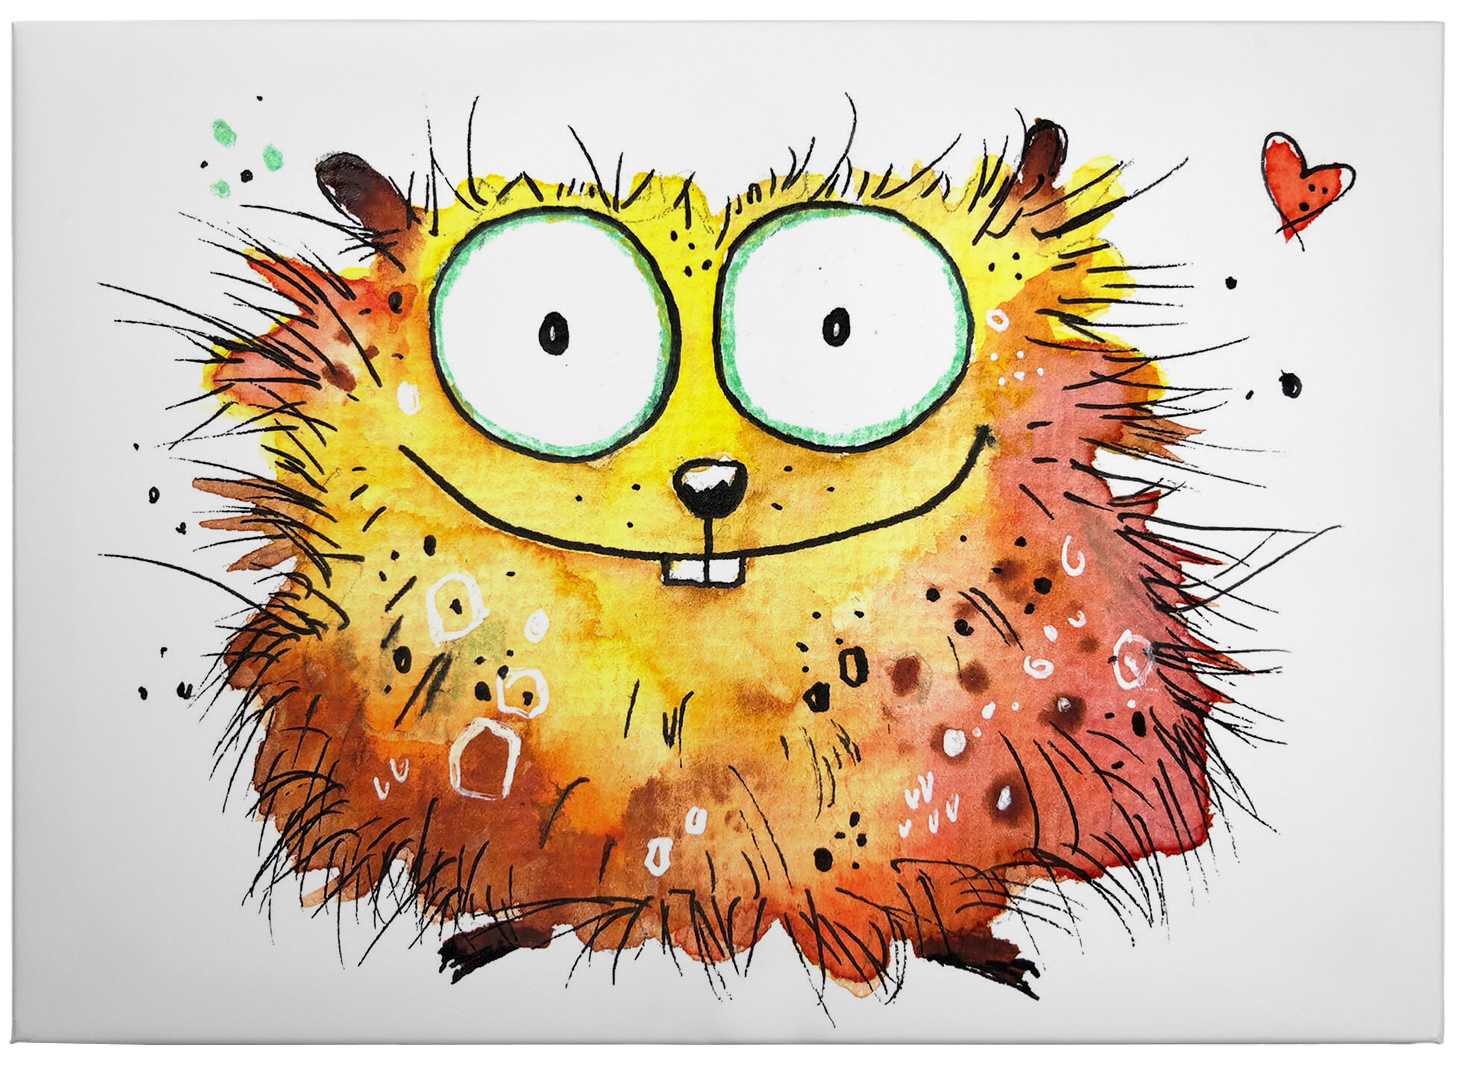             Canvas print comic hamster for children, by Hagenmeyer
        